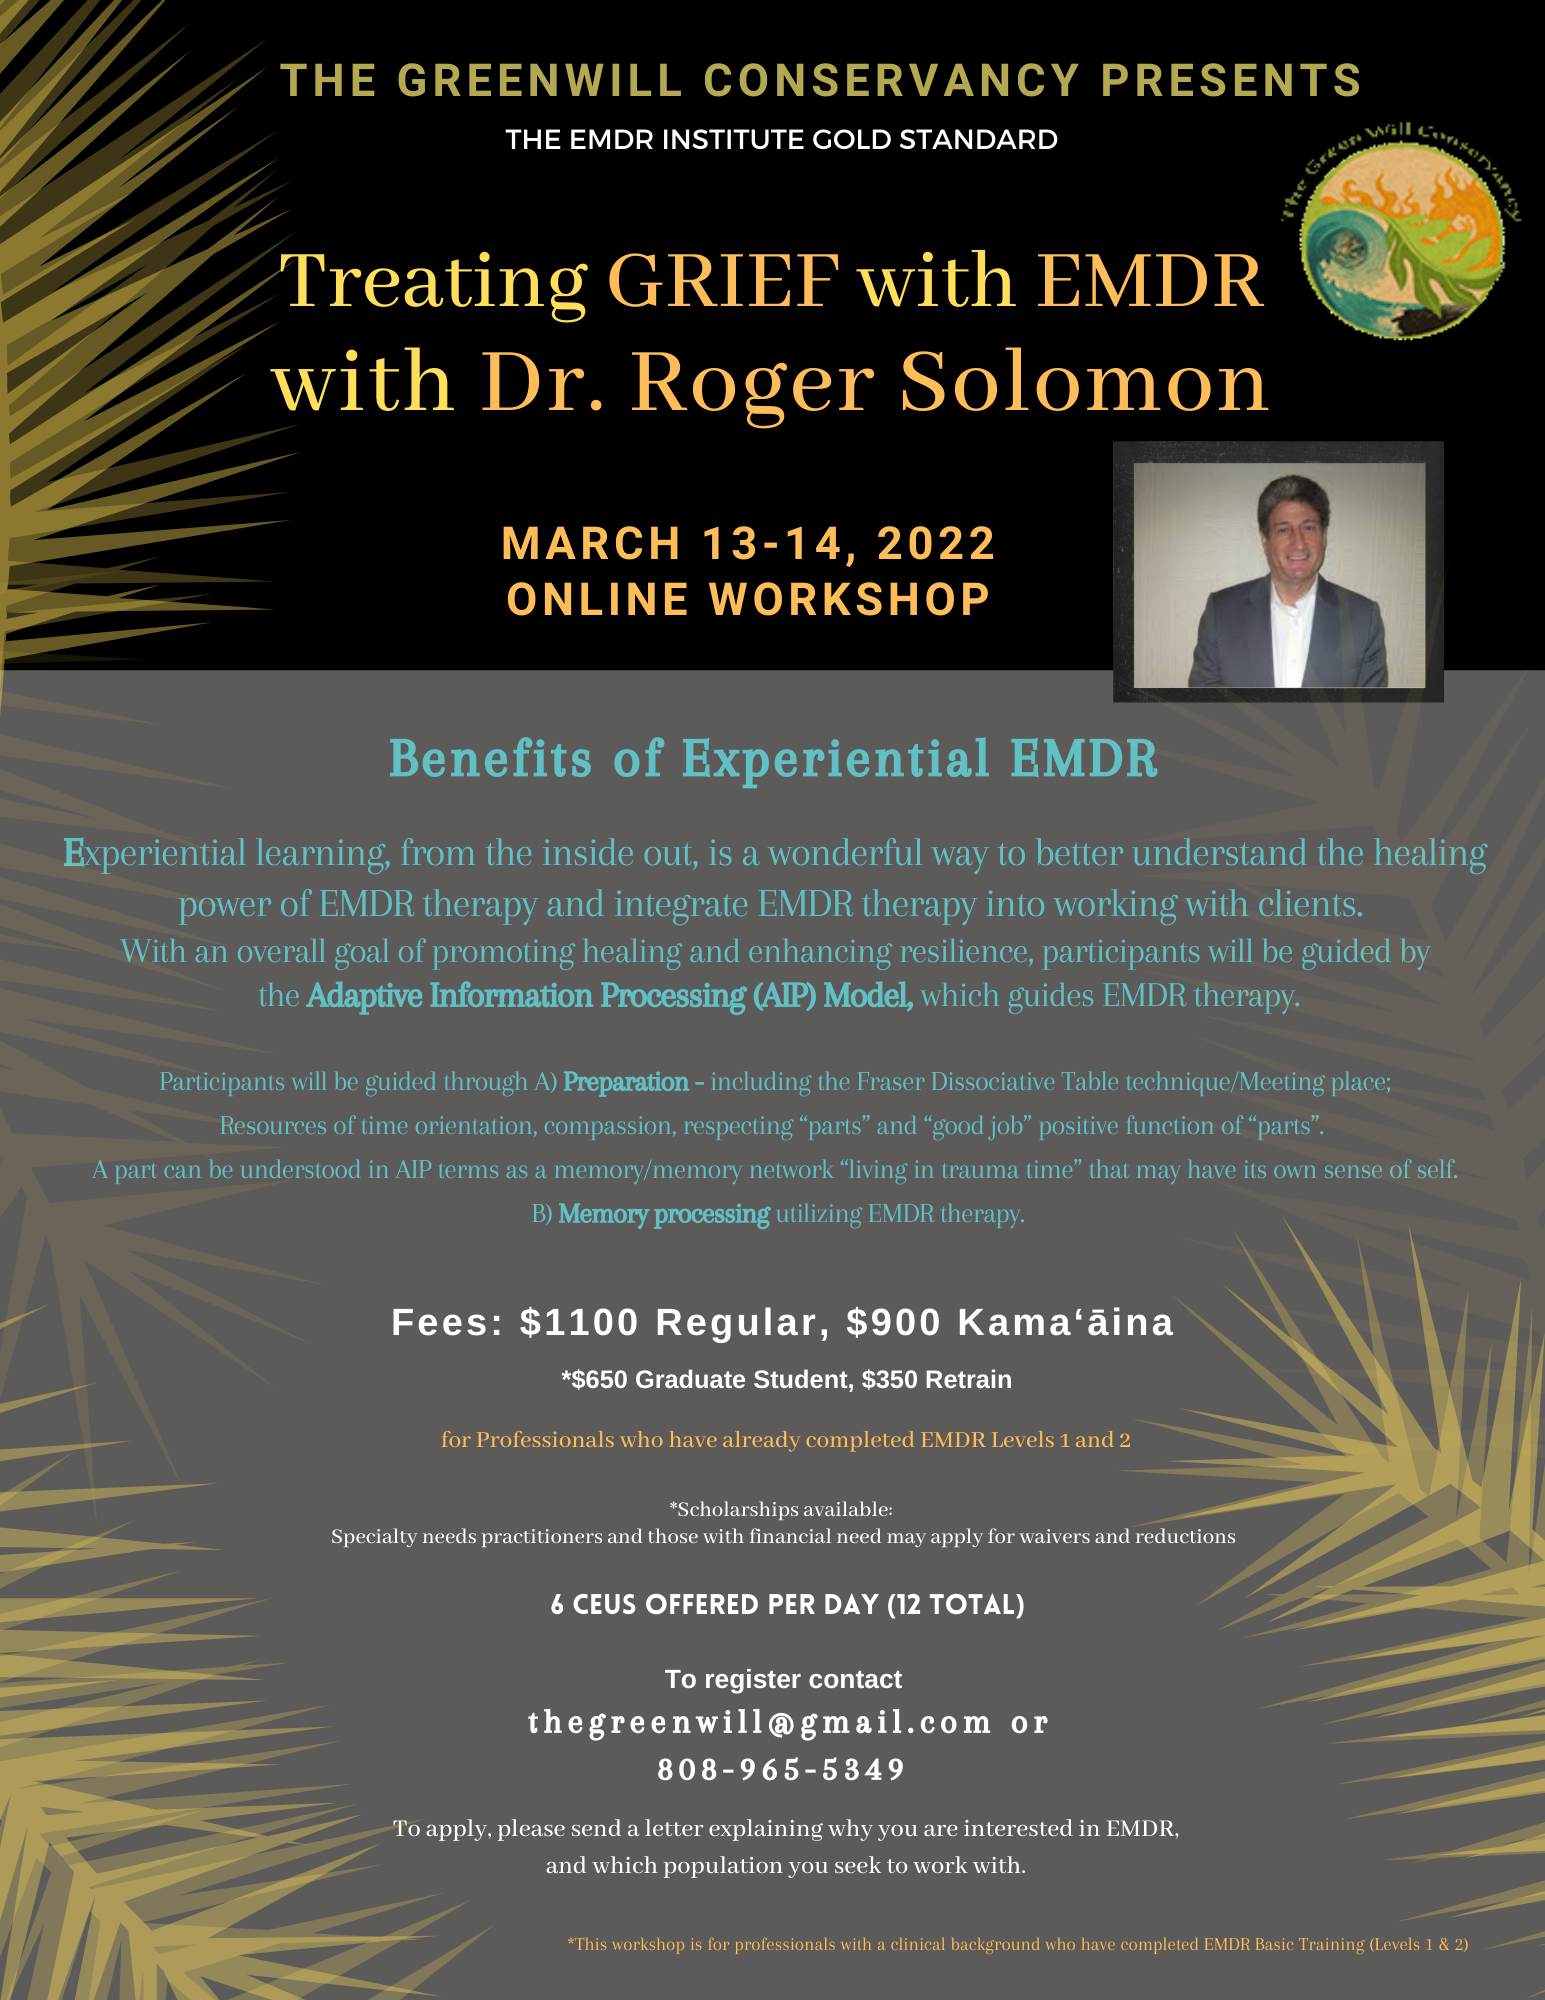 Treating Grief with EMDRDr. Roger Solomon, PhD. / Co-Sponsored by the Green Will Conservancy